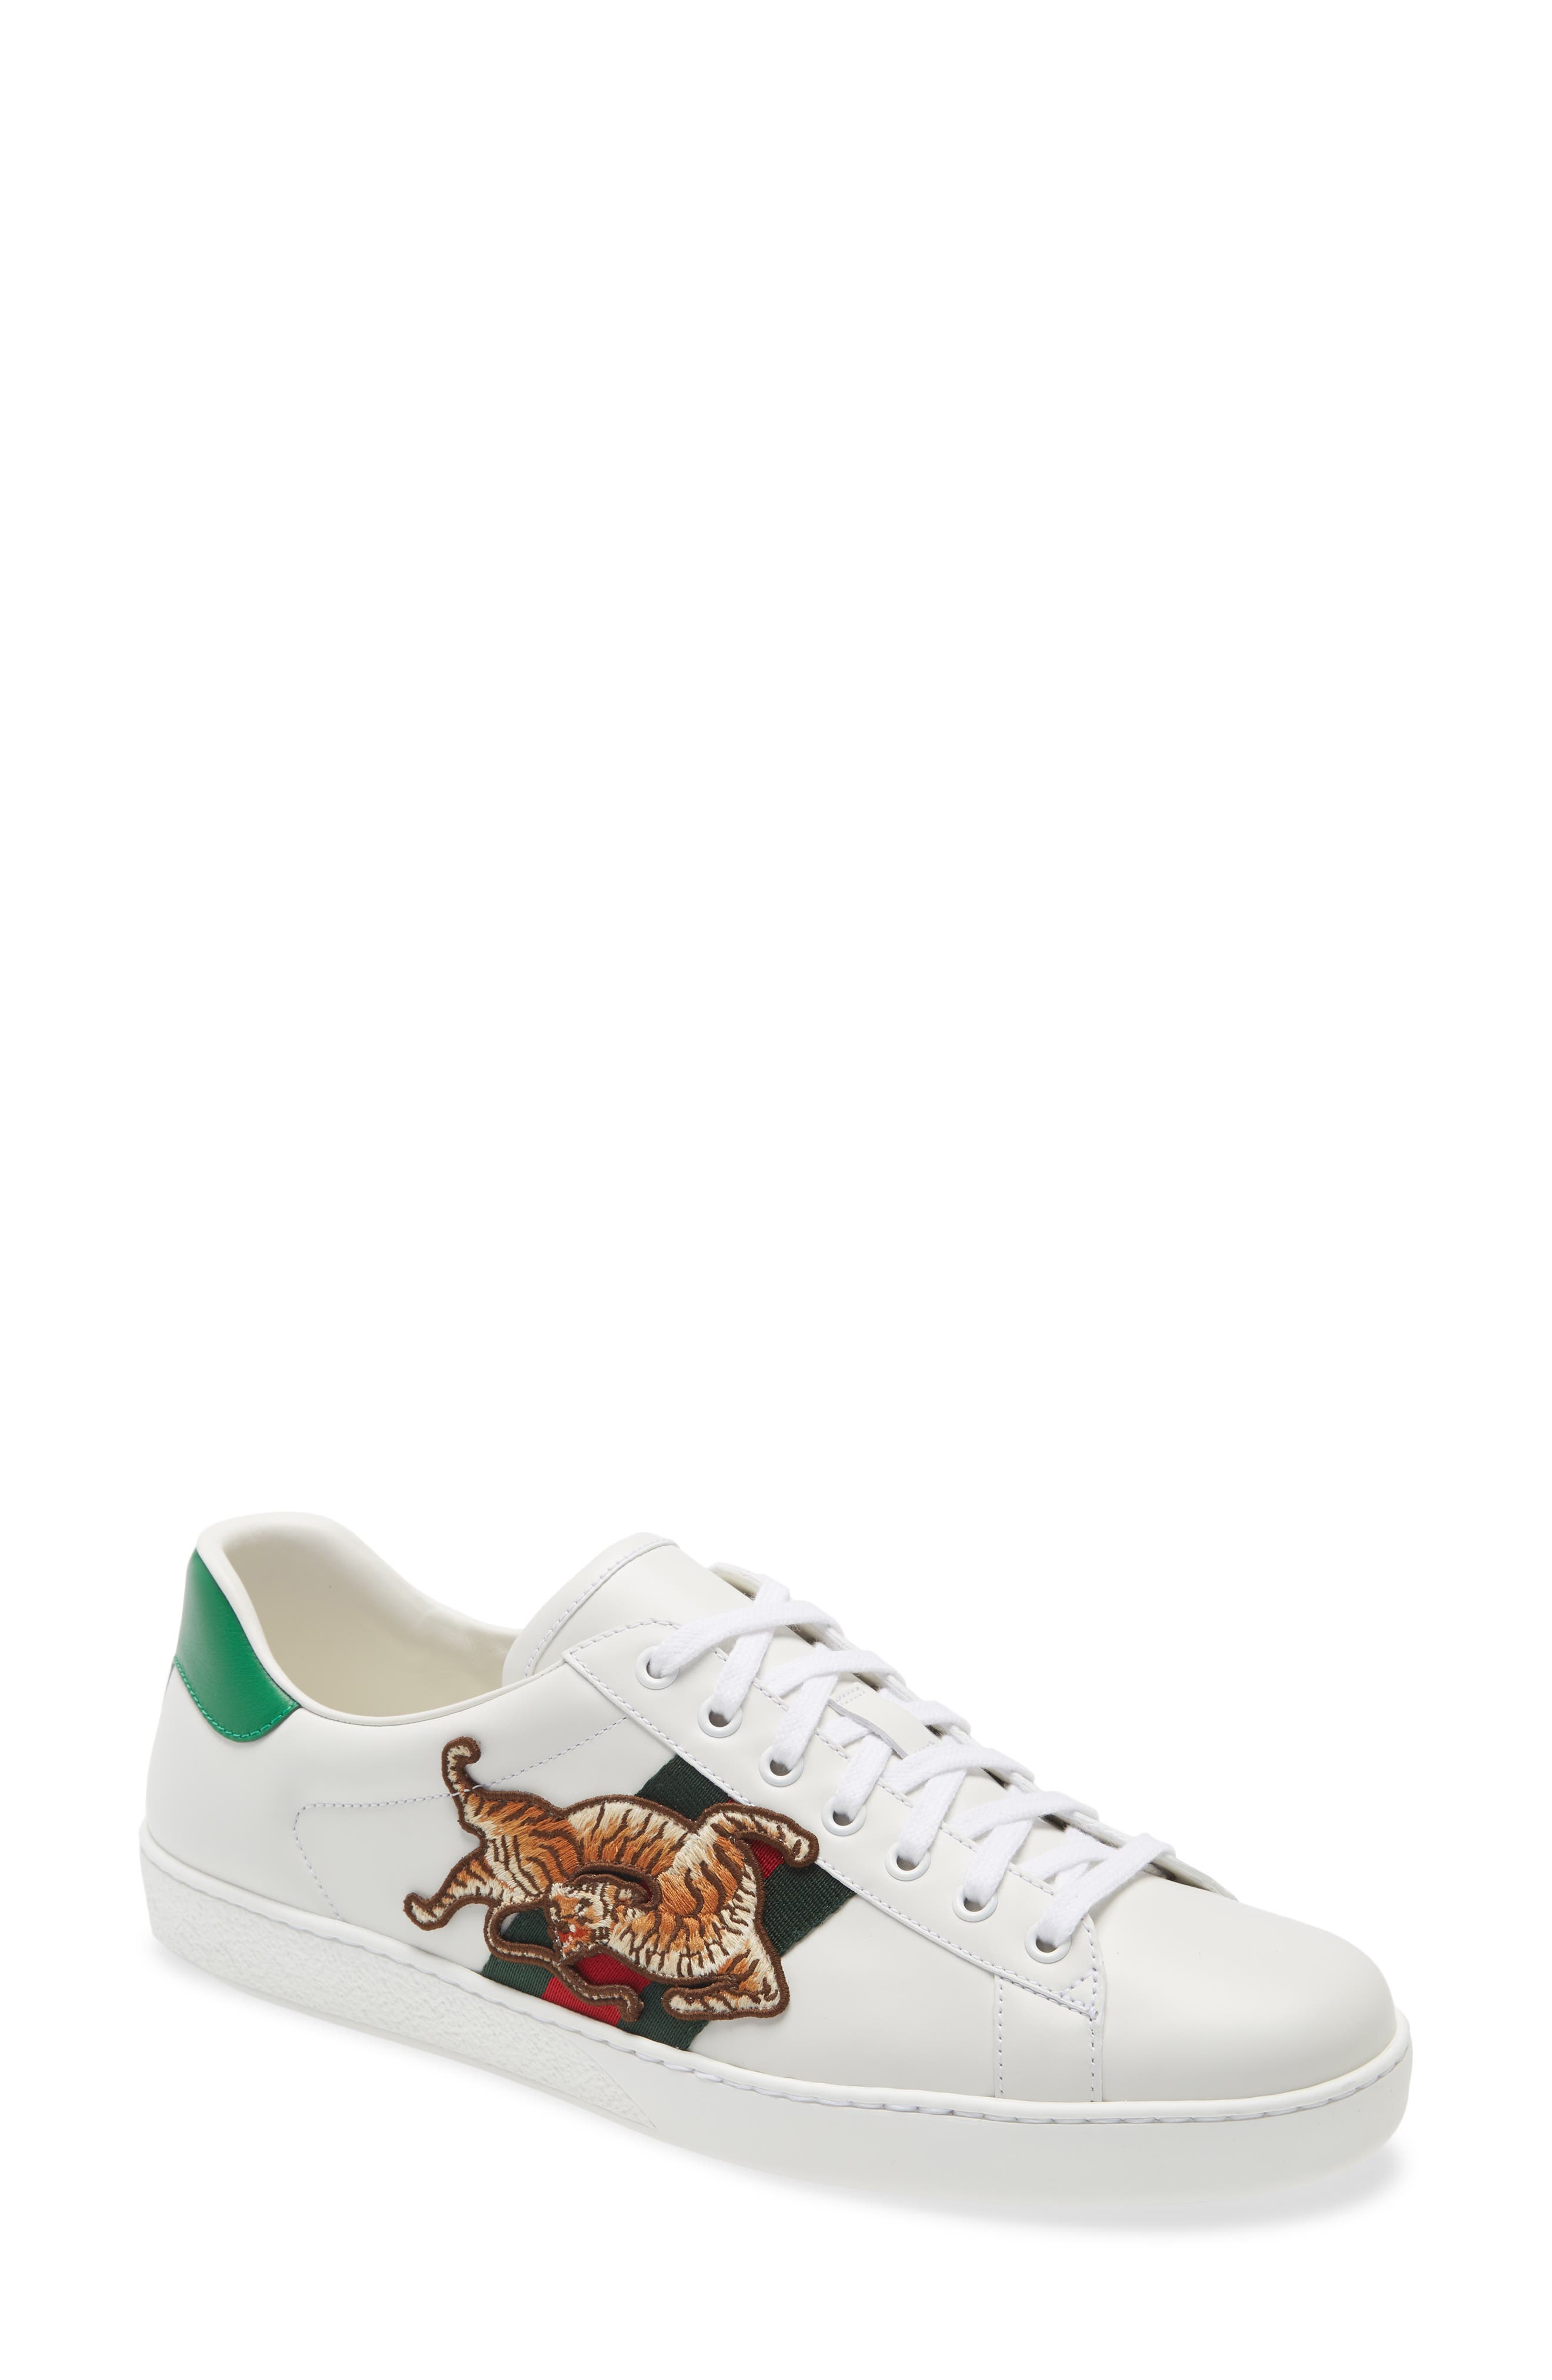 gucci shoes sneakers mens